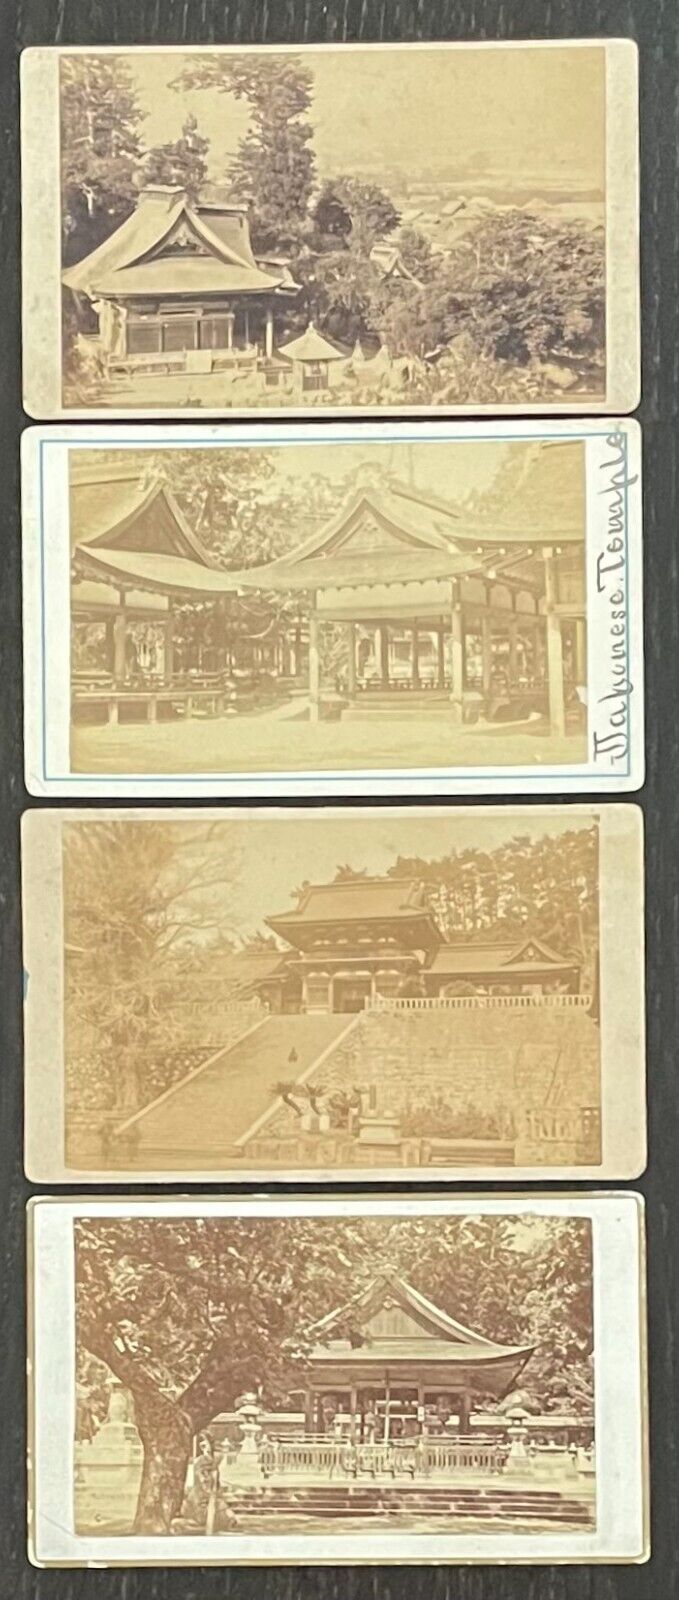 JAPANESE TEMPLES - HACHIMAN & KOBE & TWO OTHERS - FOUR ORIGINAL CDV PHOTOGRAPHS